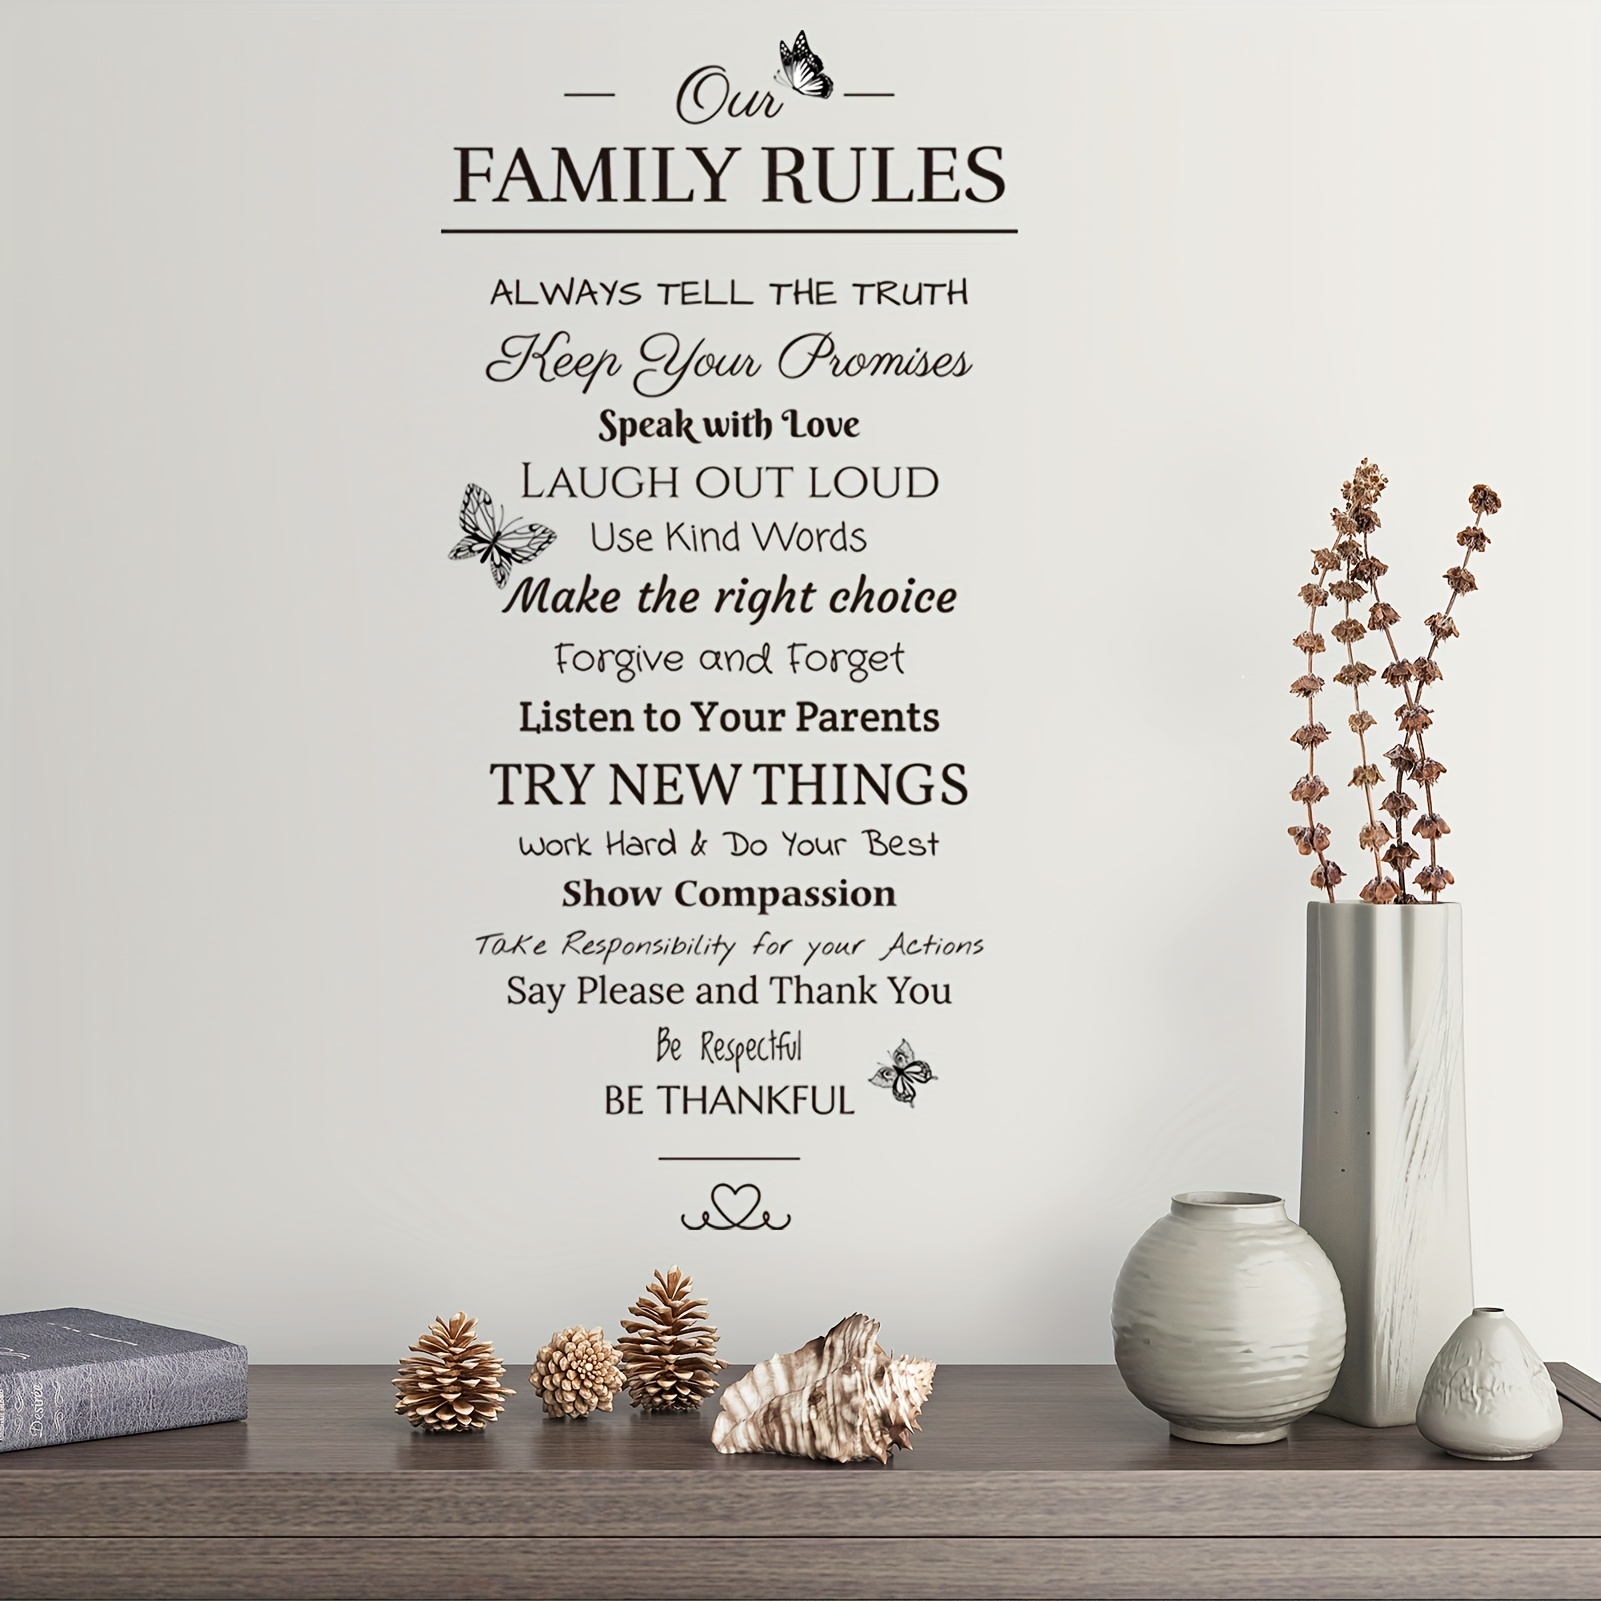 

Inspirational Quotes Saying Wall Decals, Family Rules Decorative Pattern Fashion Wall Stickers, Removable Peel And Stick Vinyl Wall Decals For Home Decor